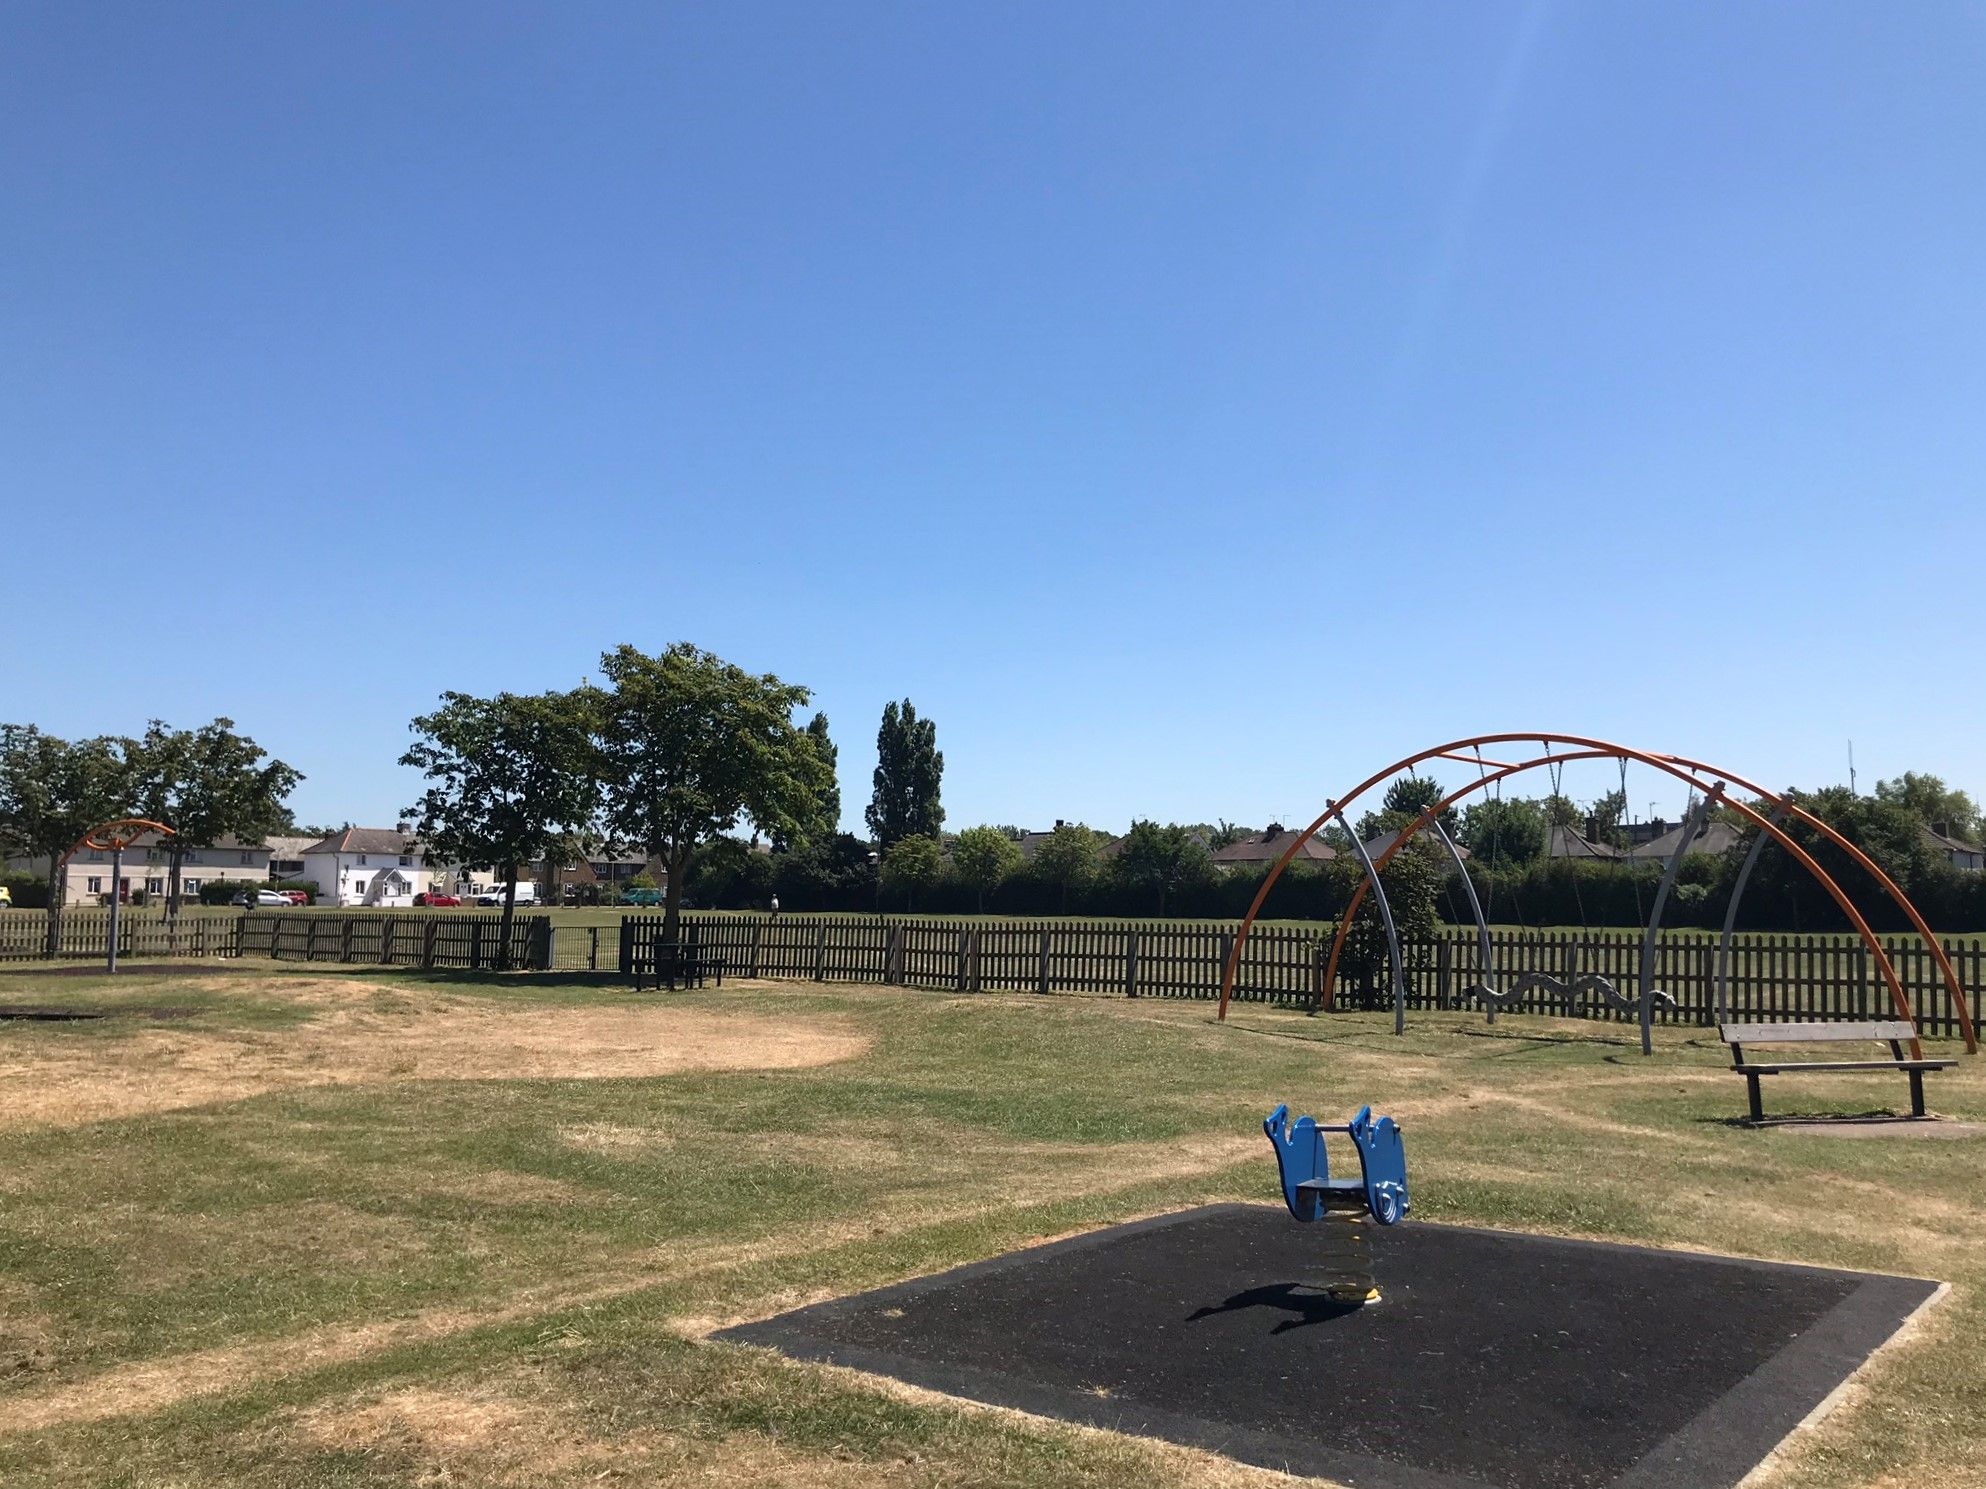 Westmeads Park play equipment, rope swing and bouncy animall